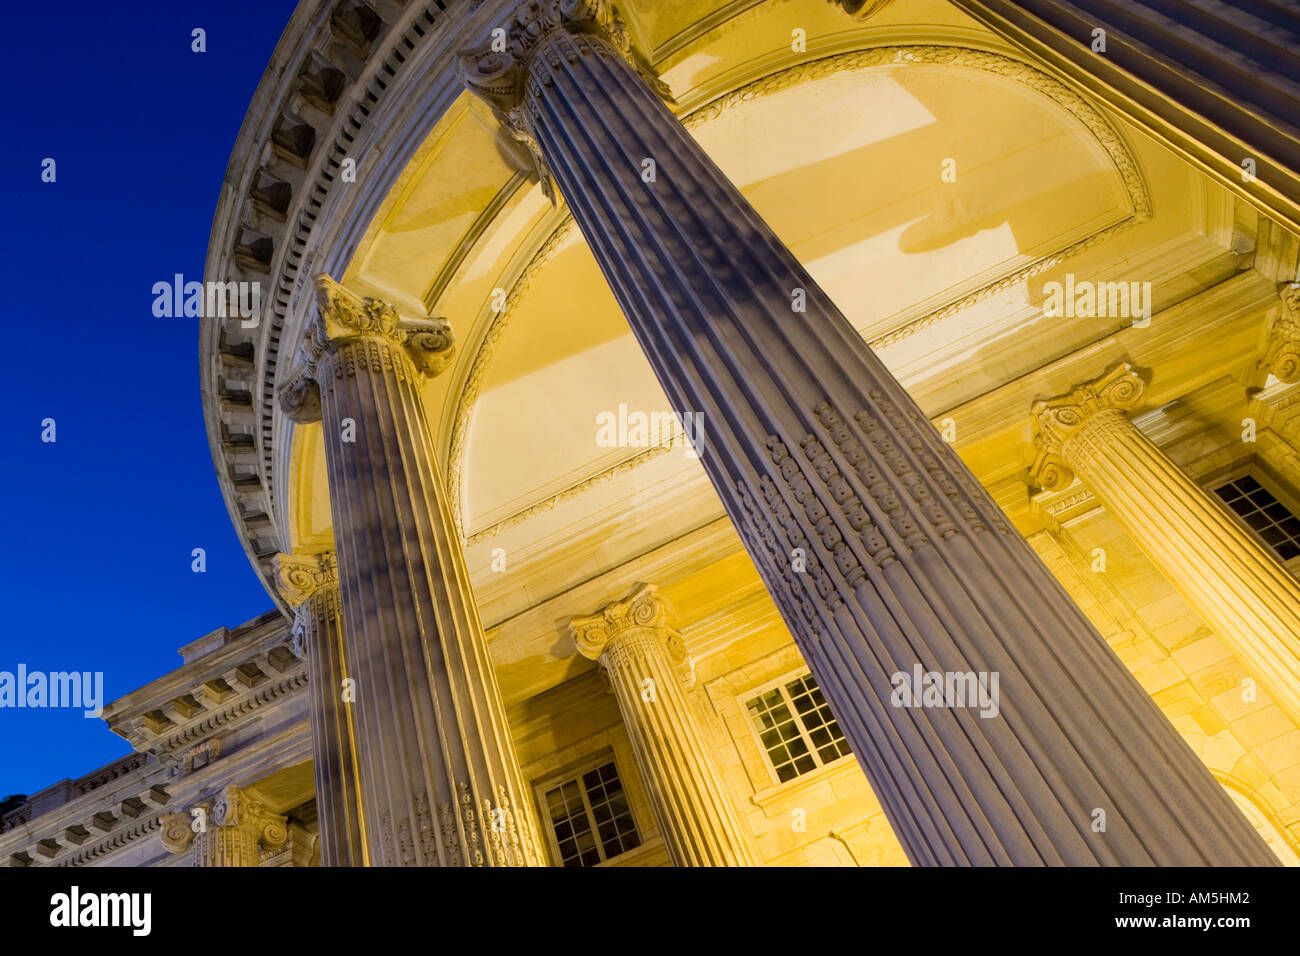 Looking up at night. Covered rotunda of the portico of the DAR hall building Washington DC Stock Photo